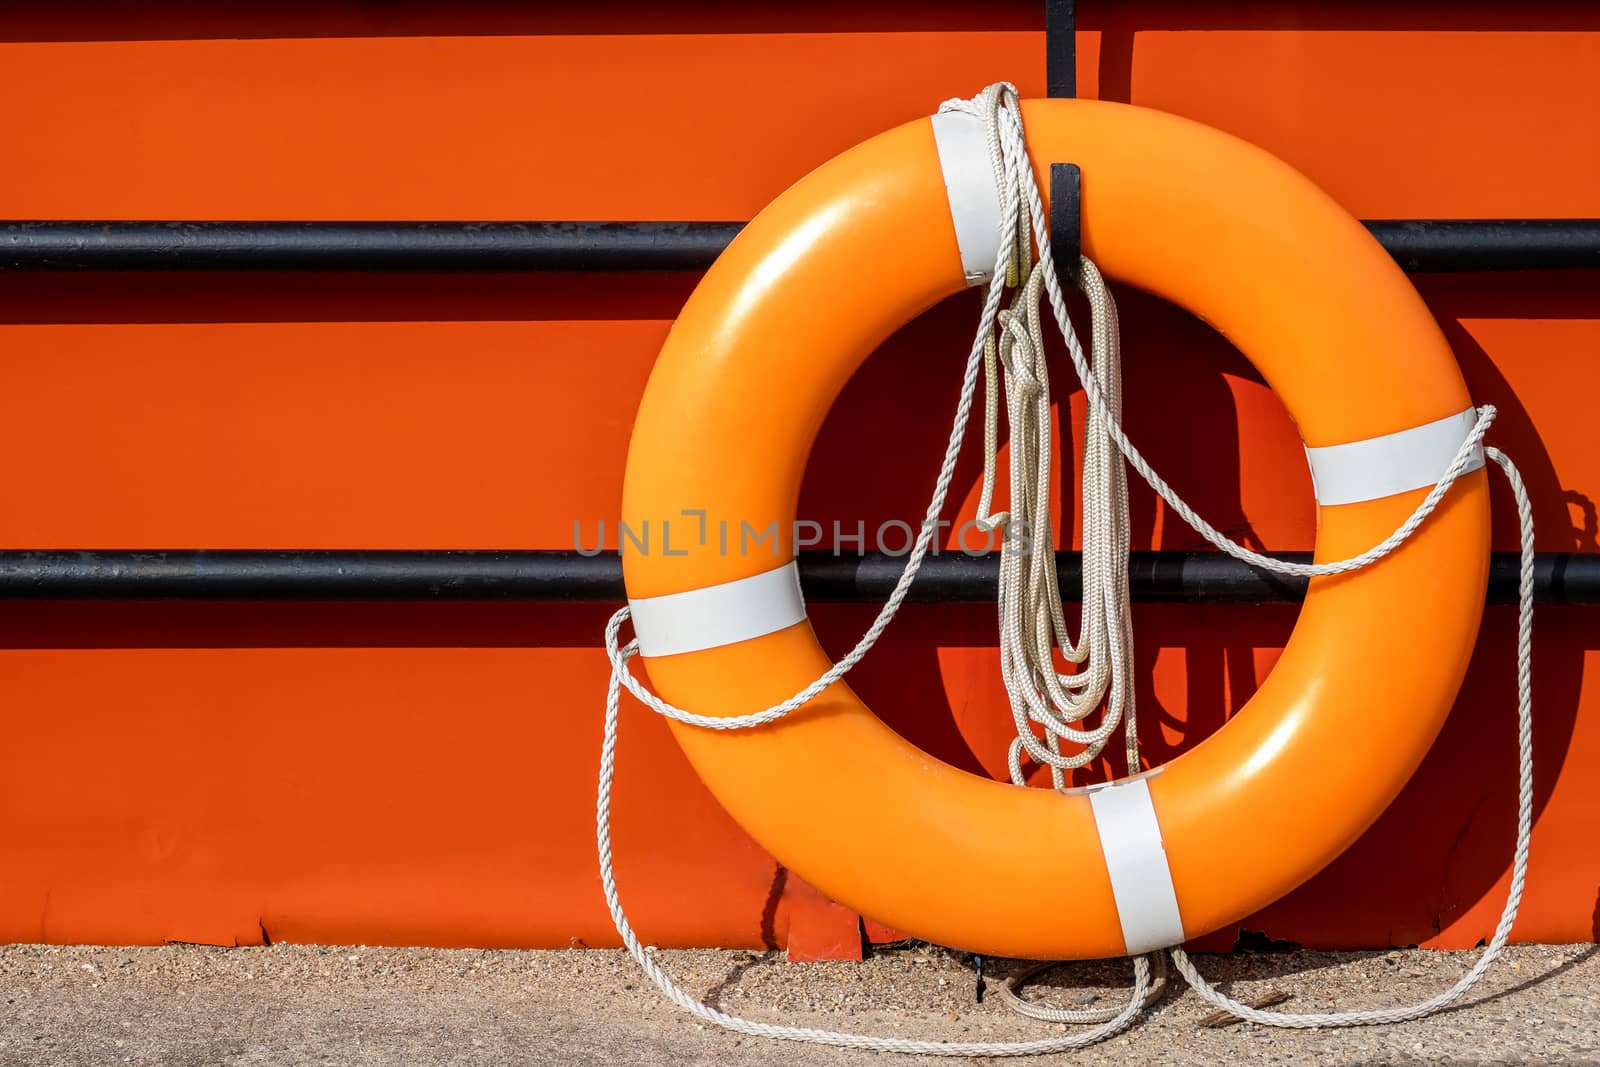 An orange life ring hangs on a hook on a black fence in front of an orange background surface. The life preserver has white ropes attached.